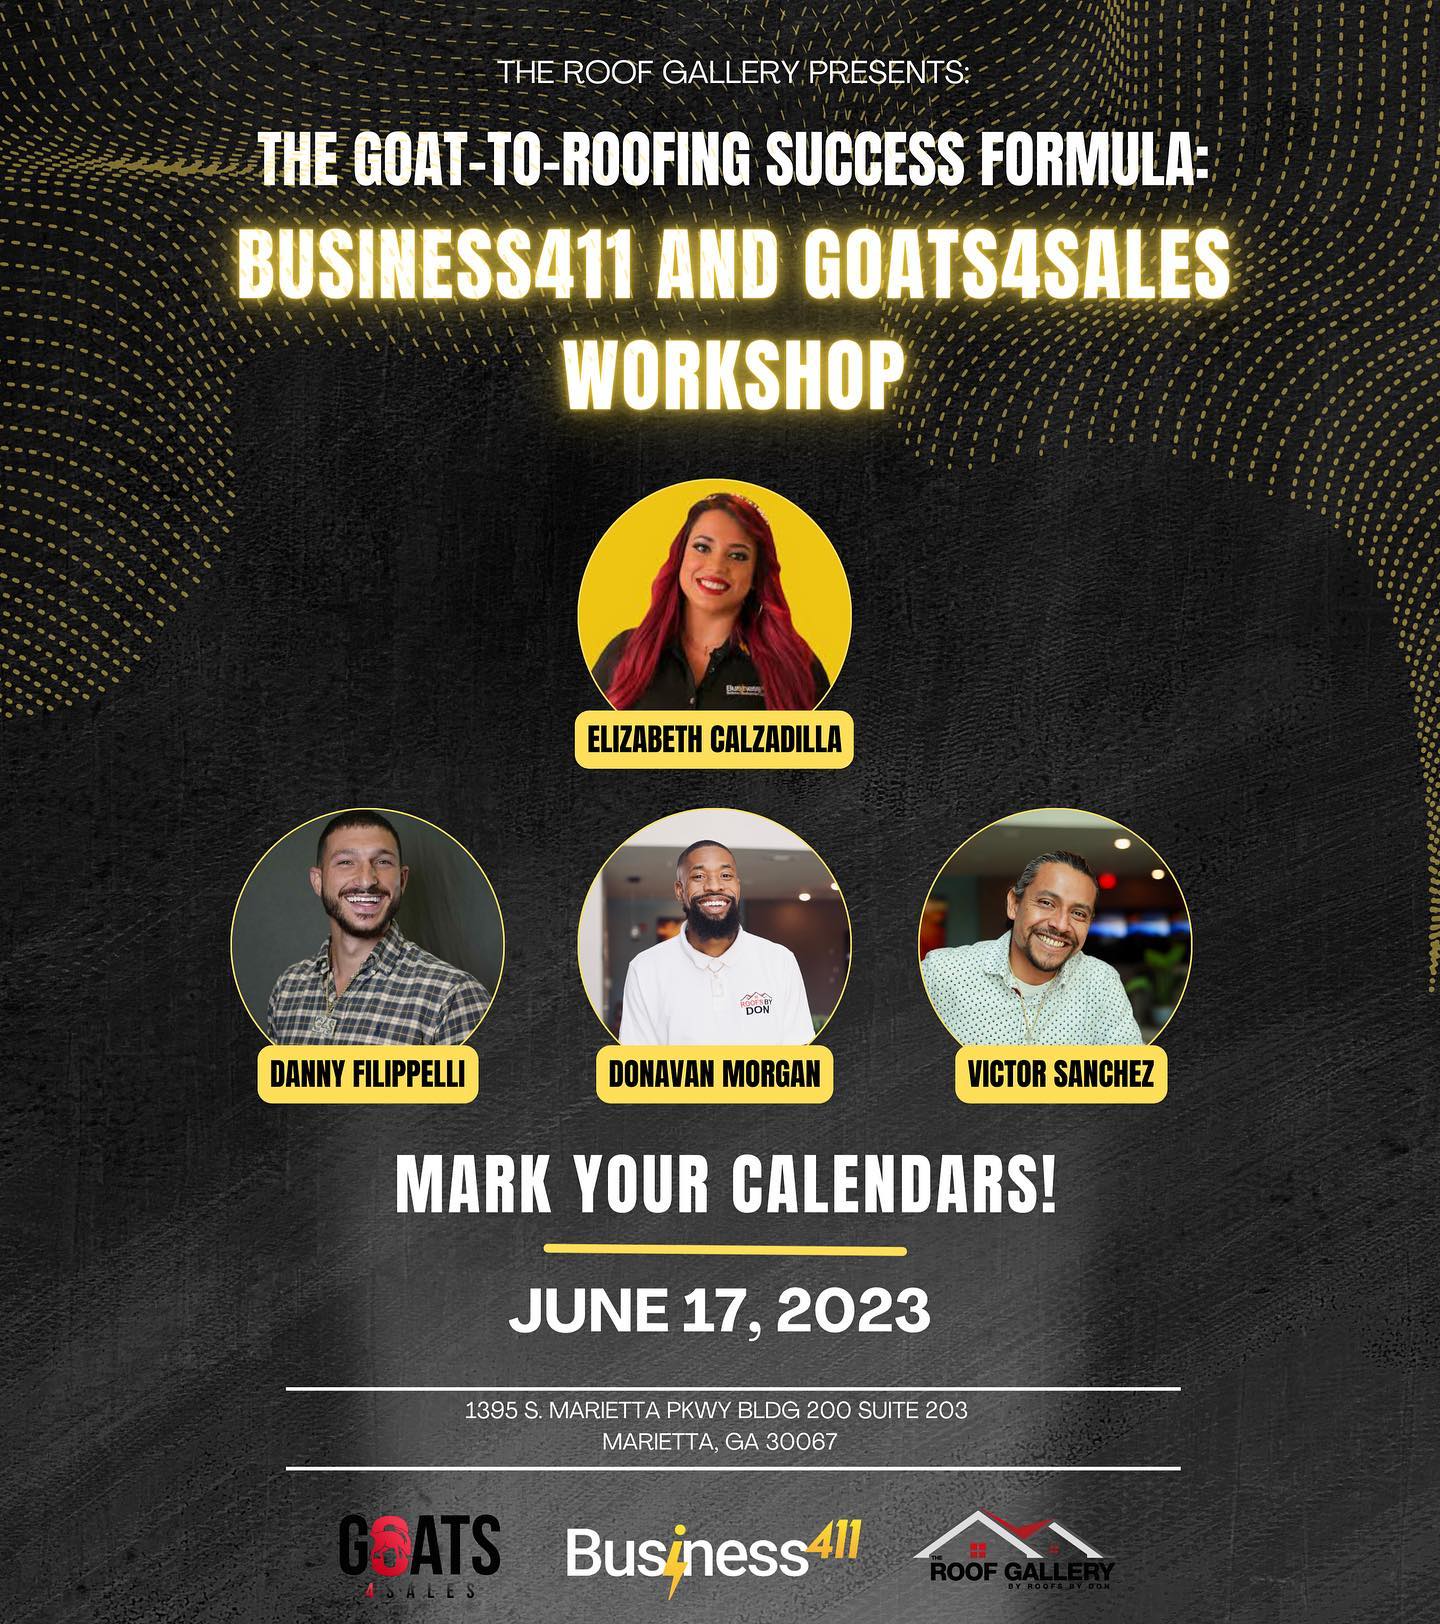 The Roof Gallery - Introducing "The Goat-To-Roofing Formula: Business411 and Goats4Sales Workshop"